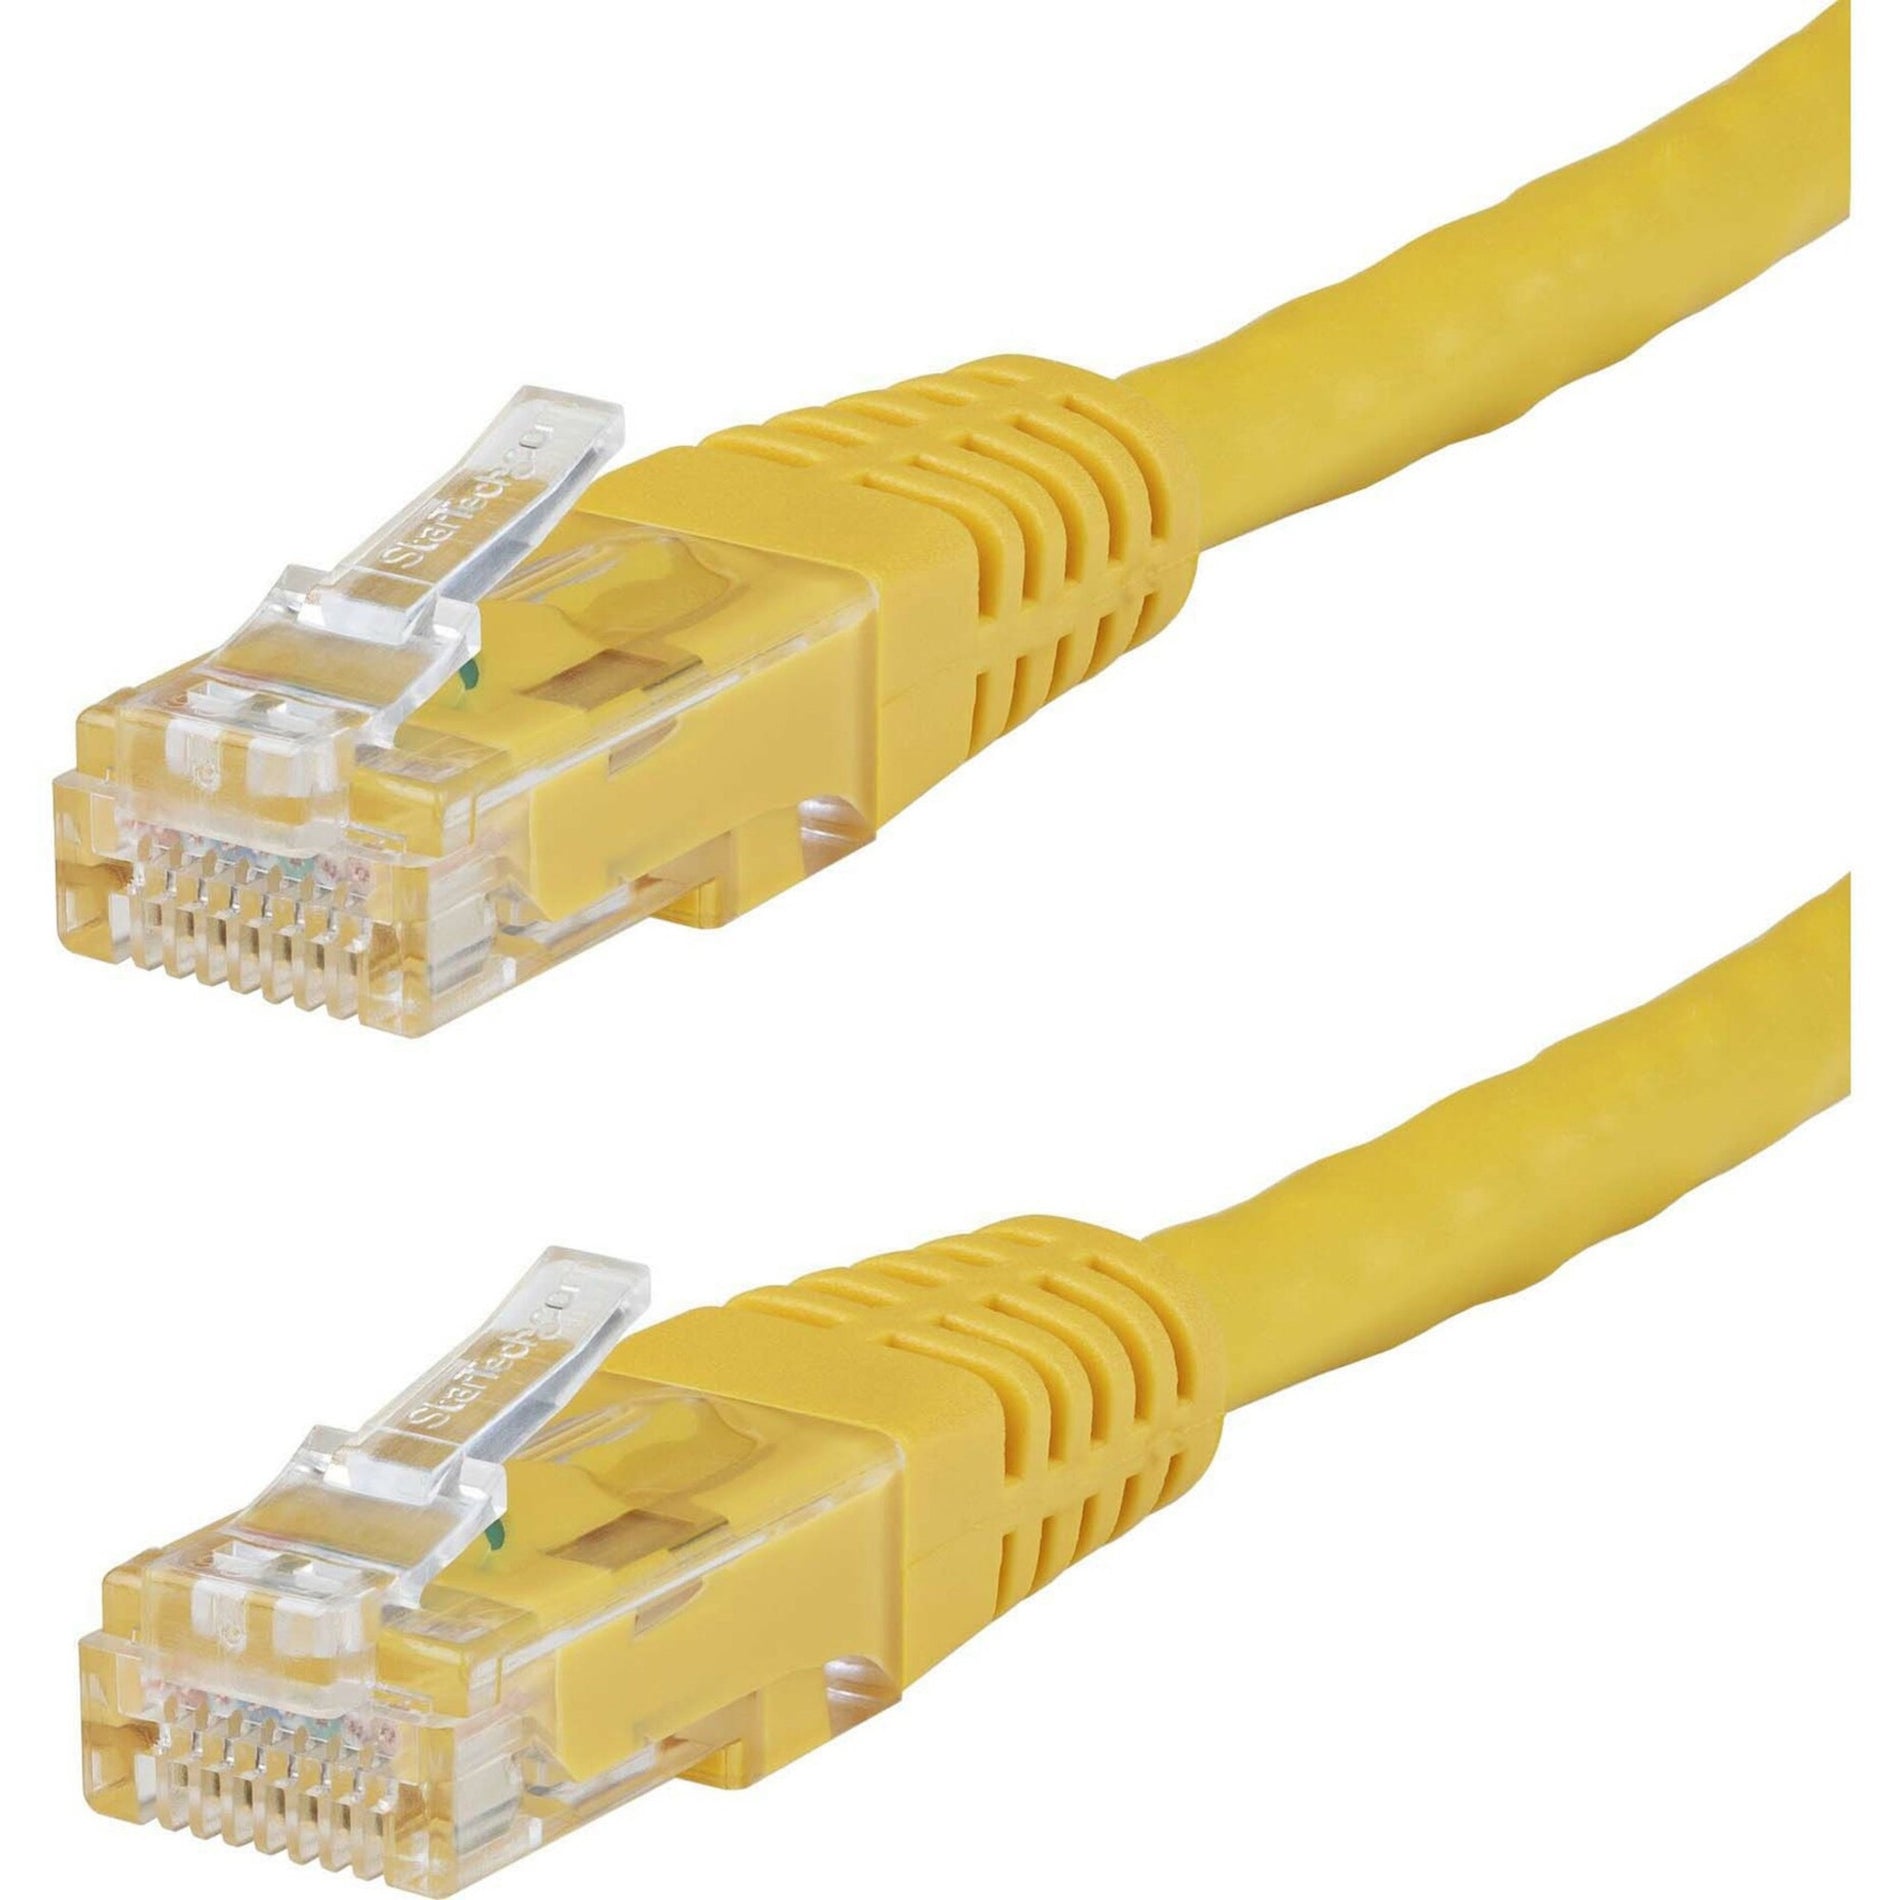 StarTech.com C6PATCH8YL 8ft Yellow Cat6 UTP Patch Cable ETL Verified, Corrosion Resistant, Bend Resistant, Stranded, PoE++, Strain Relief, Damage Resistant, Molded, PoE